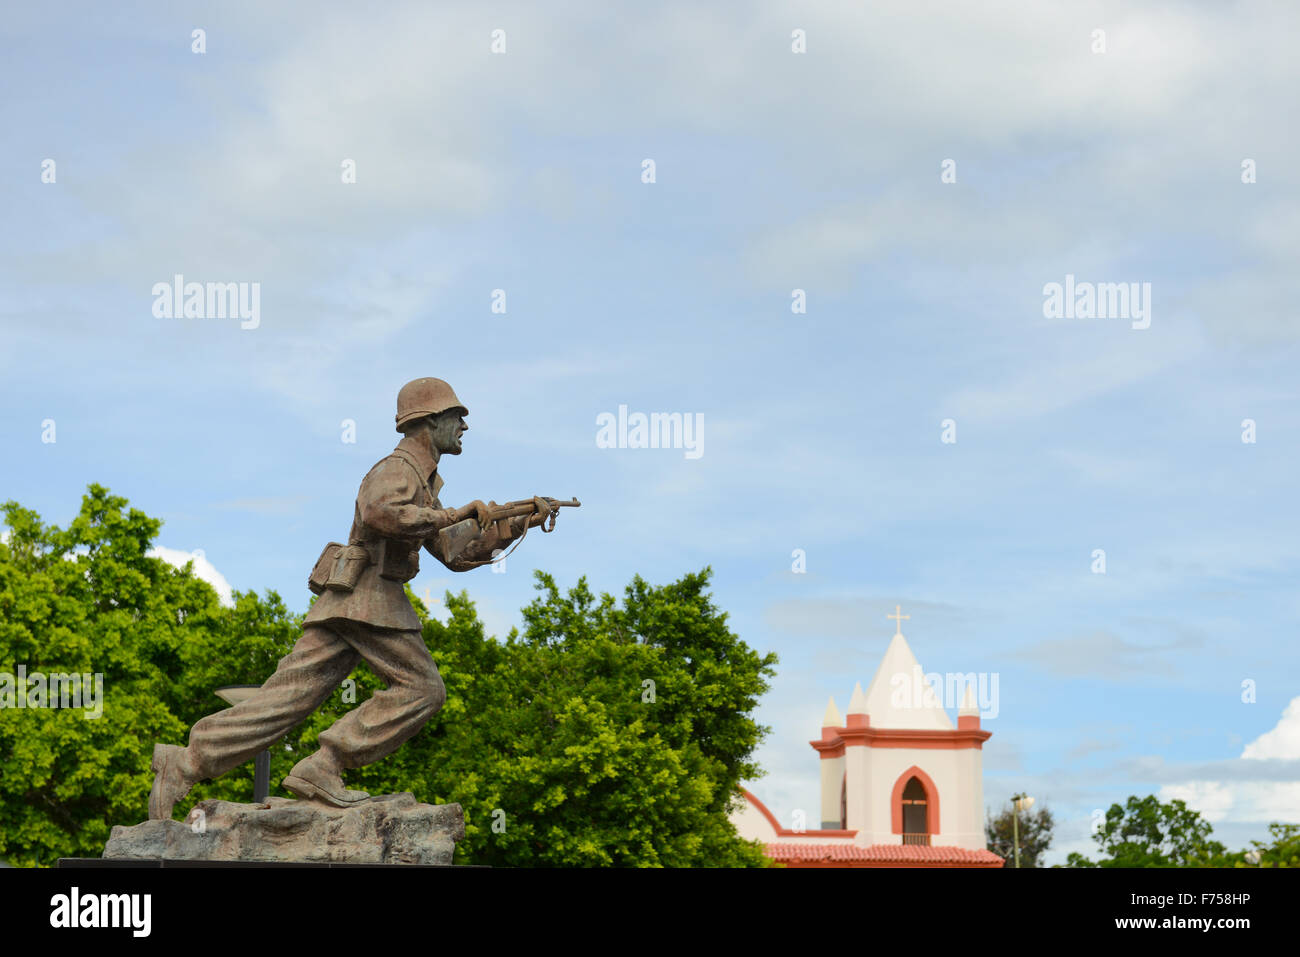 Sculpture of a soldier at a war memorial in the town of Guayanilla, Puerto Rico. USA territory. Caribbean Island. Stock Photo